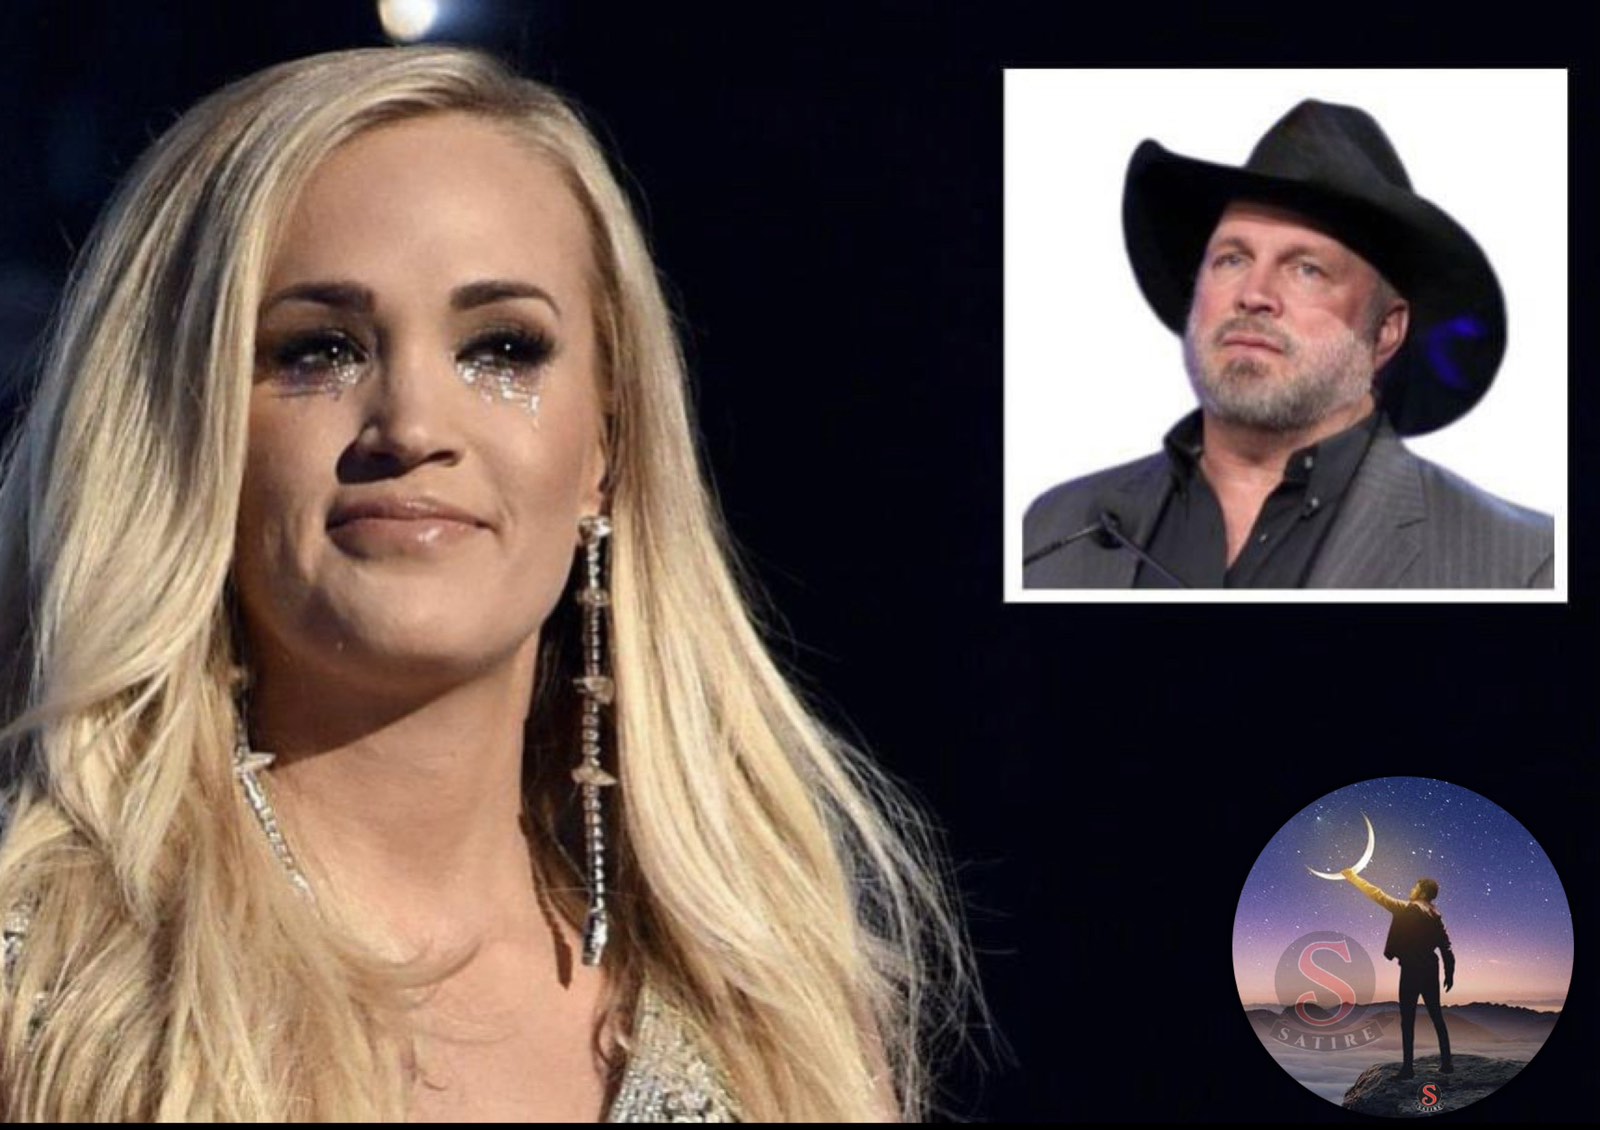 Carrie Underwood Pulls Out of Remaining Shows with Garth Brooks: “Booing Experience Wasn’t Enjoyable”